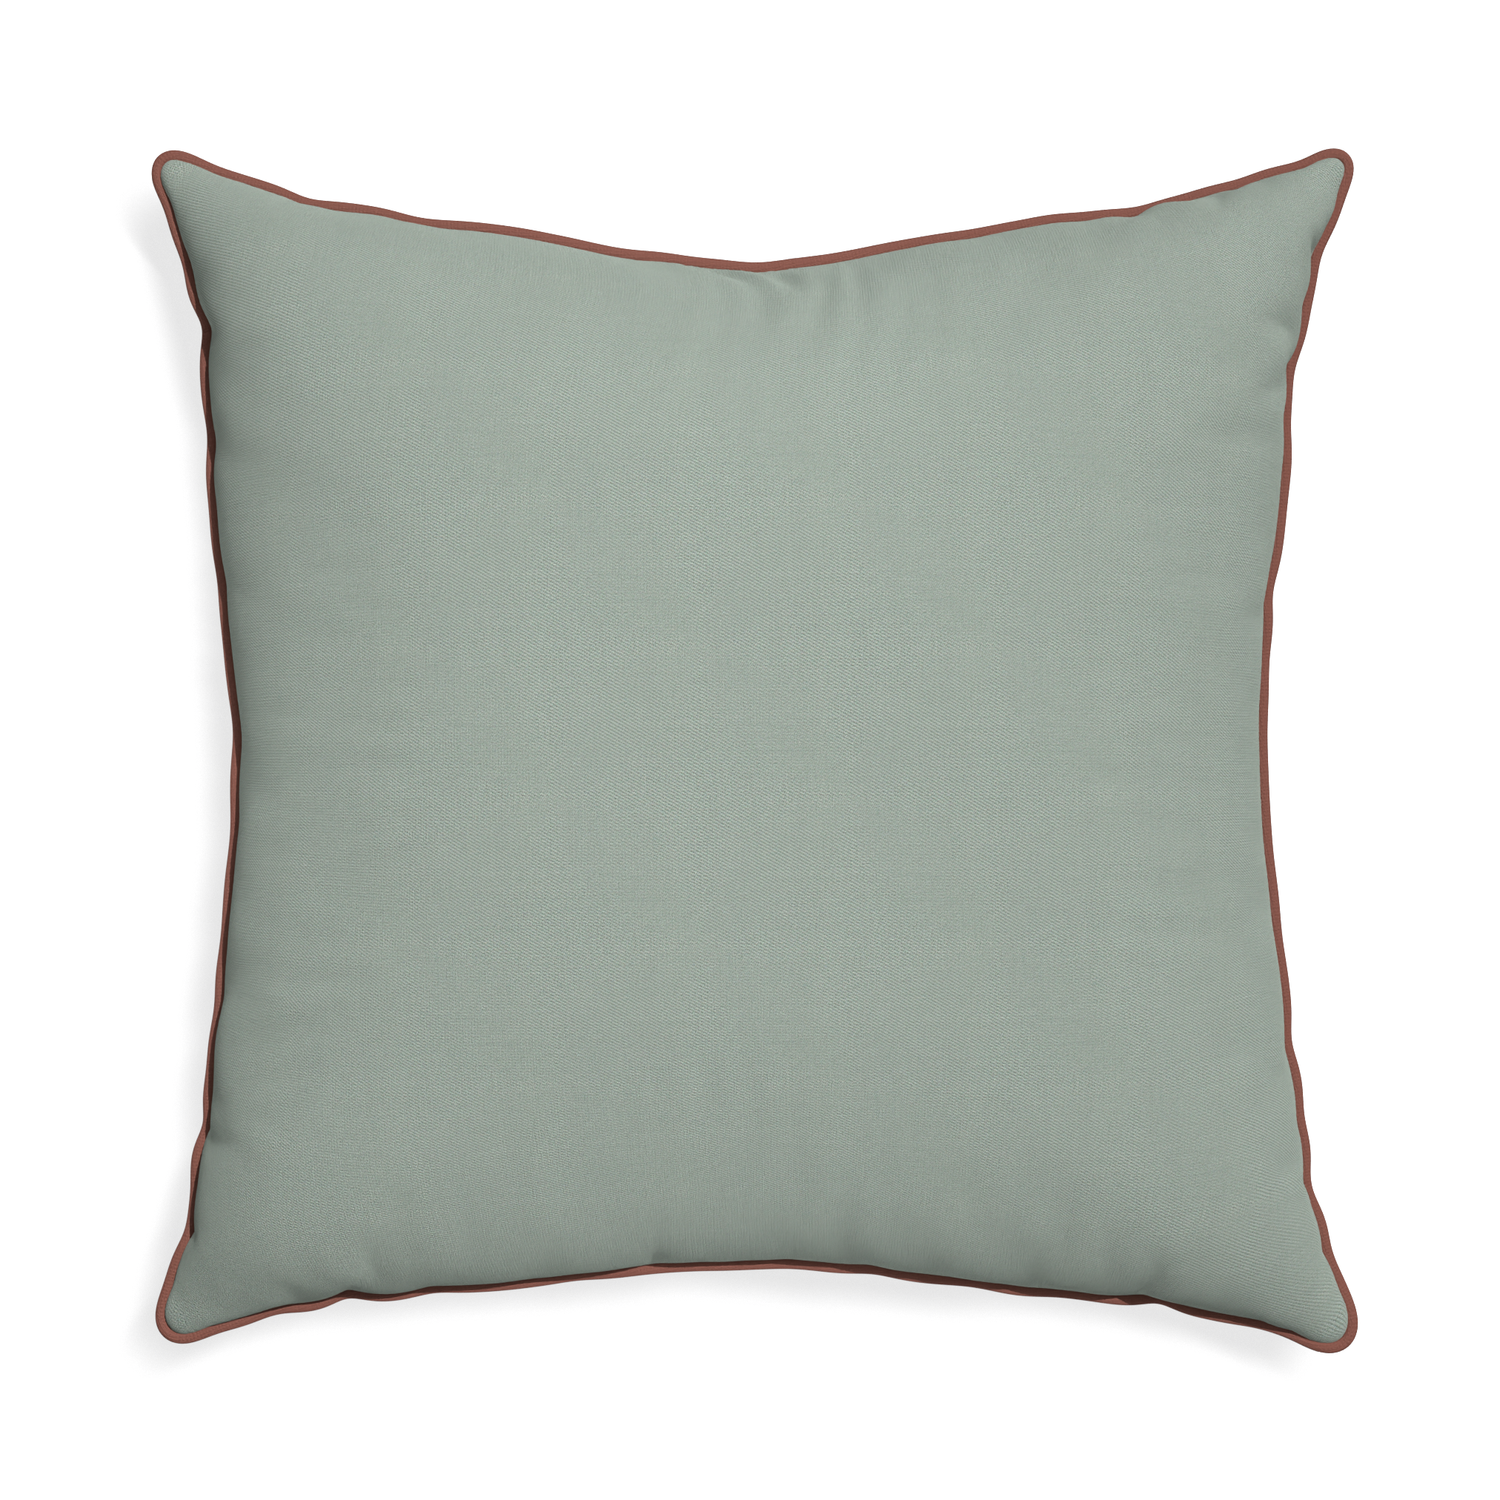 Euro-sham sage custom sage green cottonpillow with w piping on white background